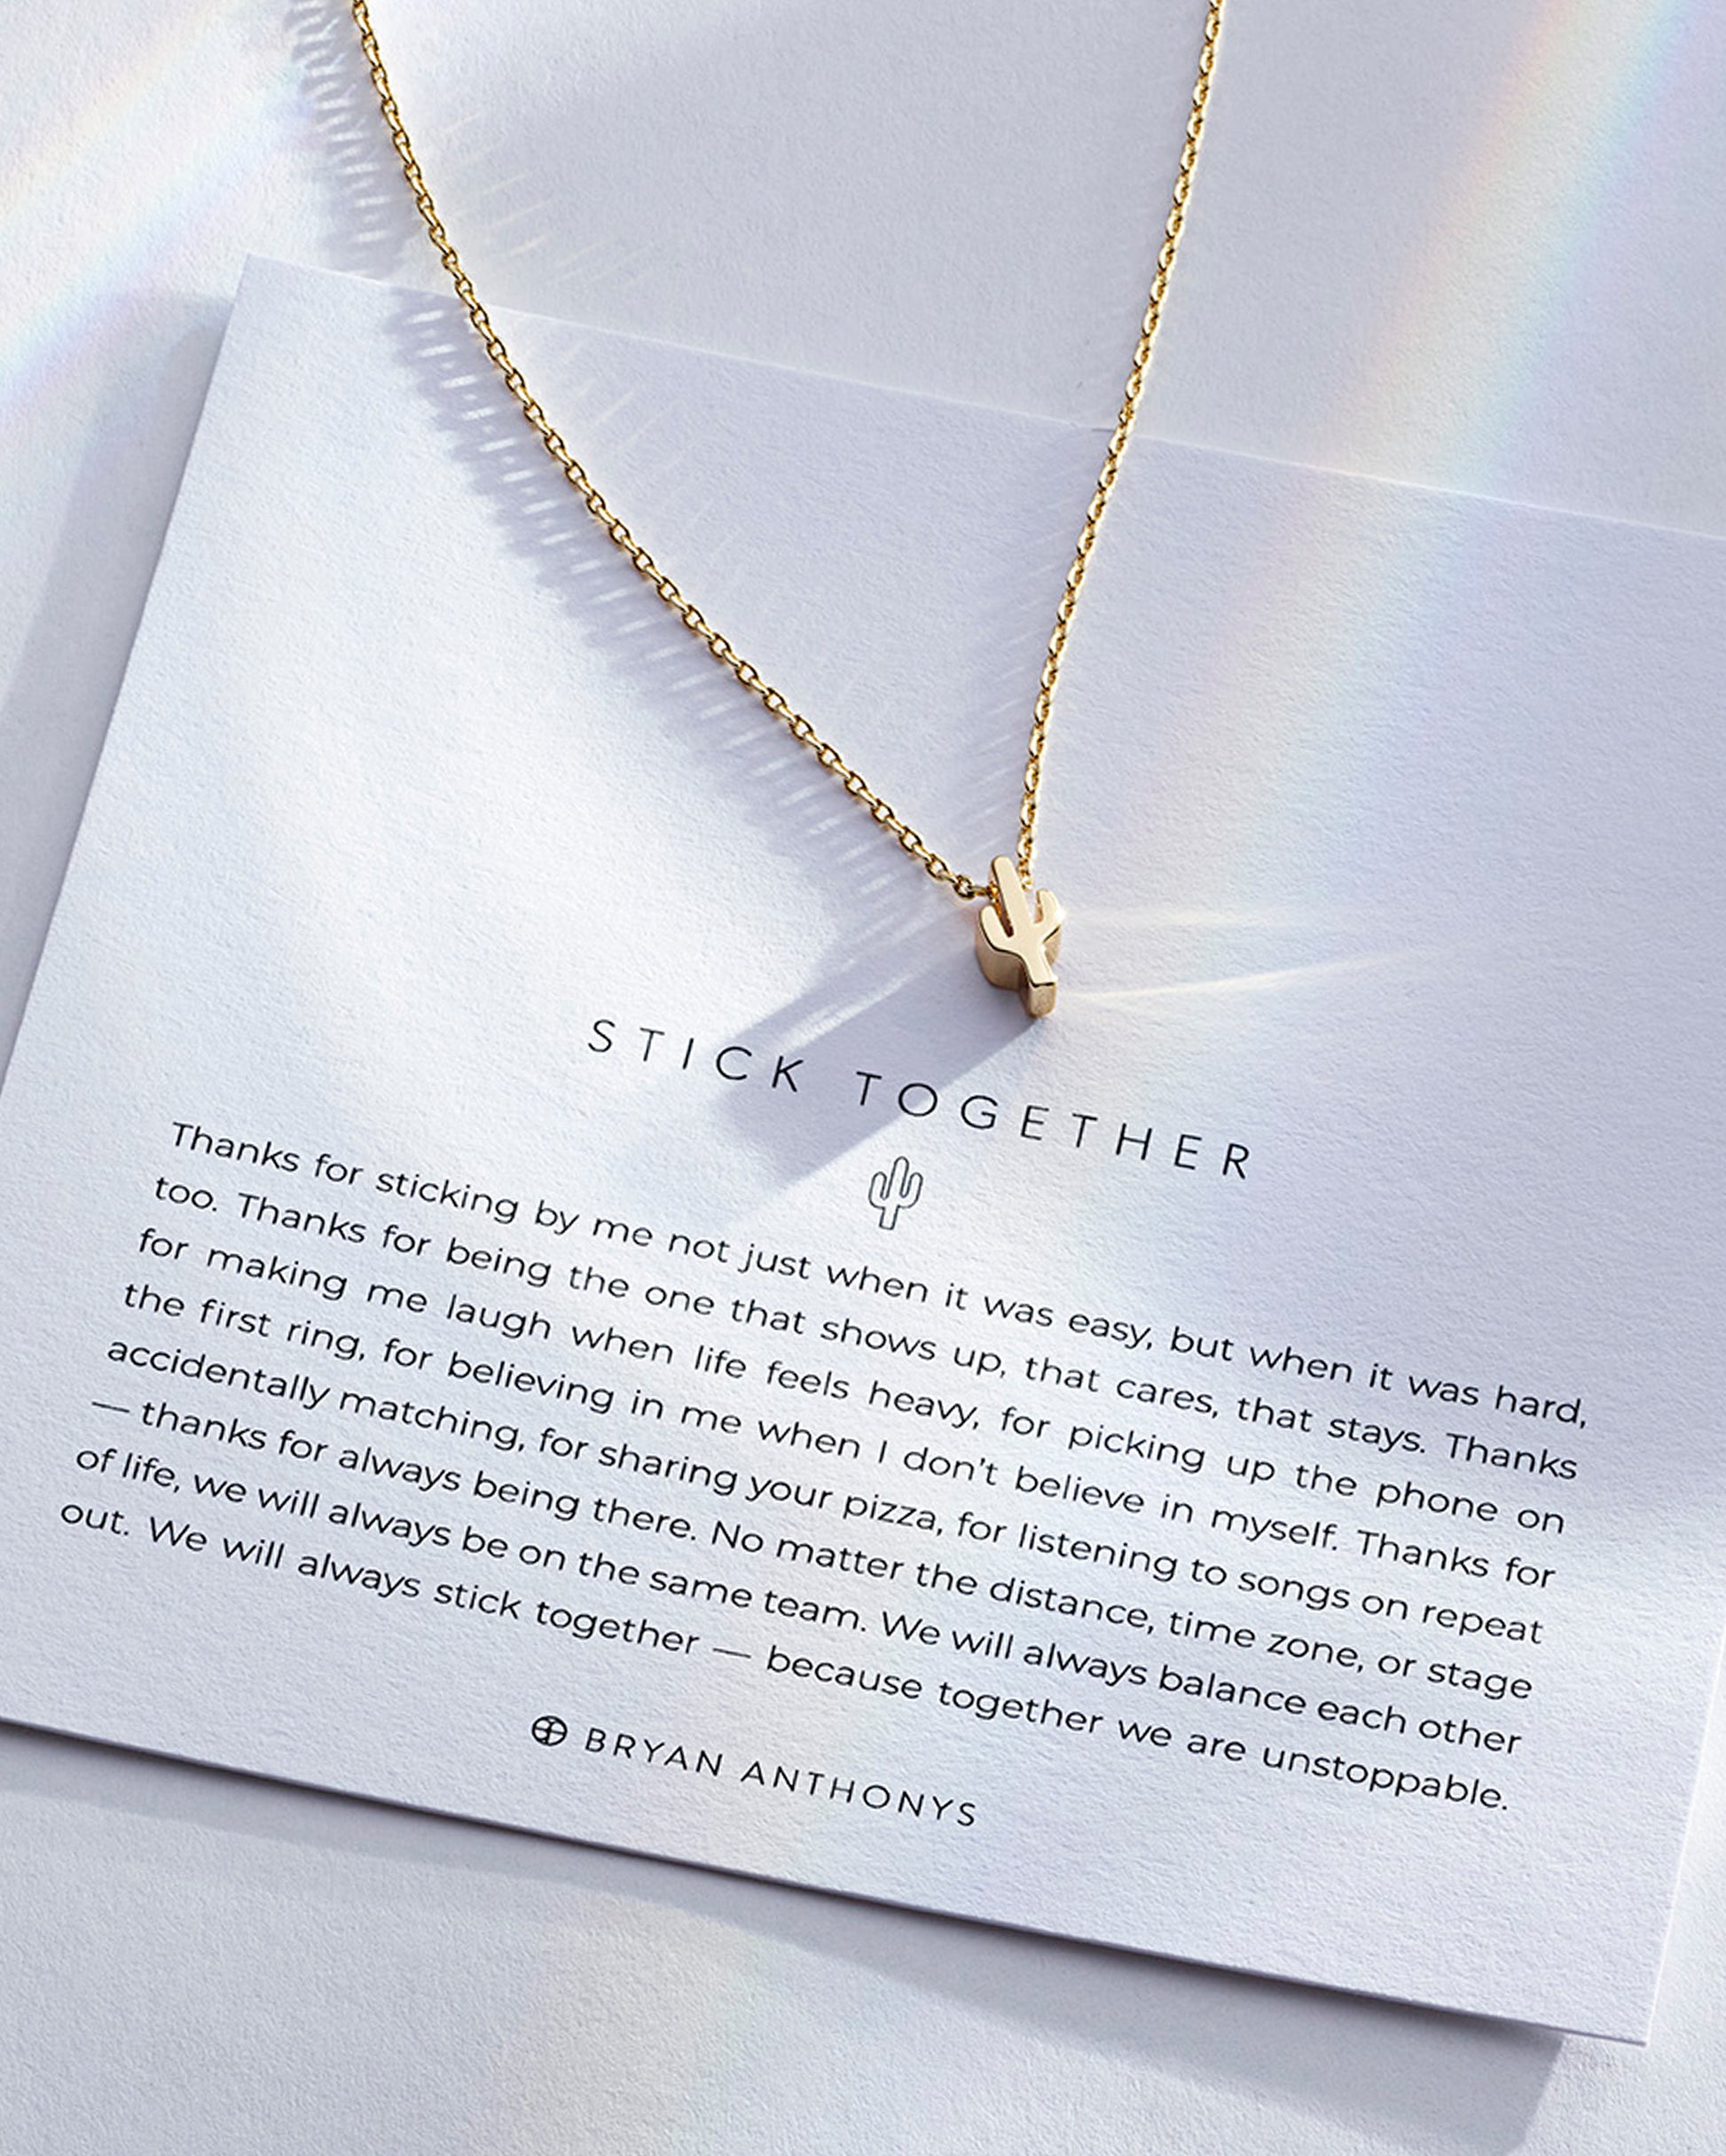 Bryan Anthonys Stick Together Gold Necklace Dynamic On Card